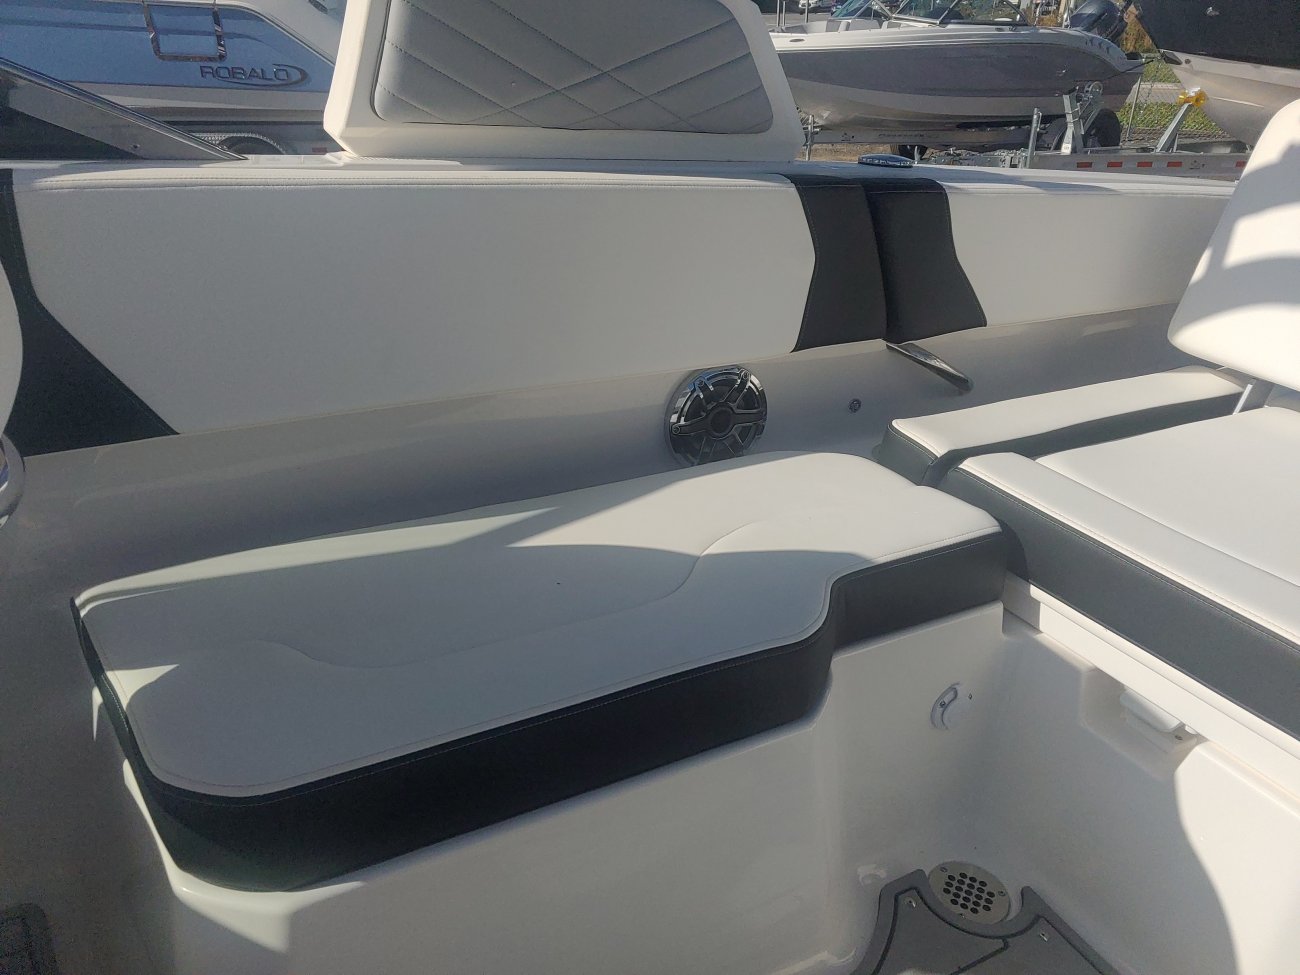 A 250 OSX is a Power and could be classed as a Bowrider, Dual Console, Runabout,  or, just an overall Great Boat!